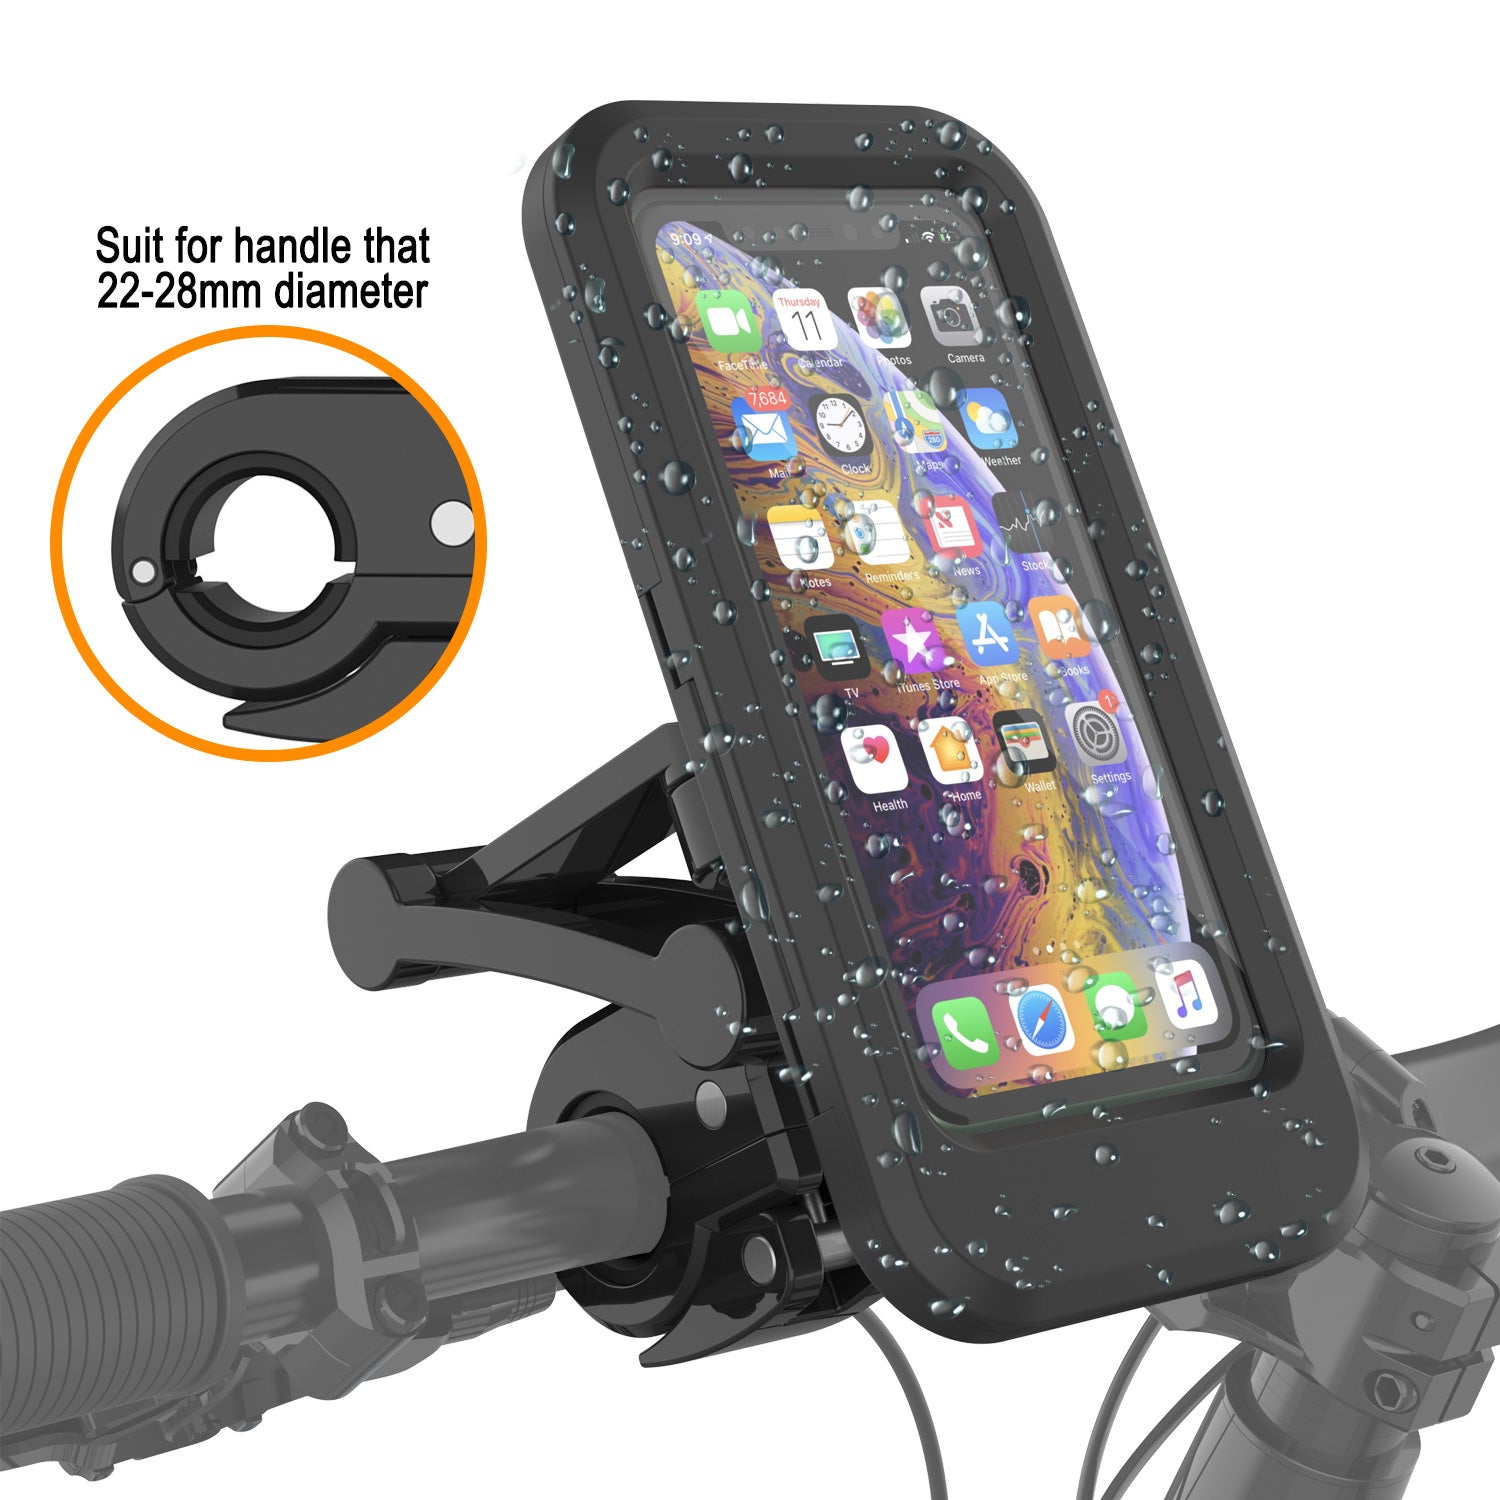 https://www.punkcase.com/cdn/shop/products/punkcase_waterproof_bike_phone_case_universal_handlebar_stand_for_cellphones_up_to_6_7_touch_screen_responsive_360_rotation_fully_adjustable_handlebar_for_bikes_and_motorcycles_shock_de92a4f6-708c-4578-ae34-6f8220b98bcb.jpg?v=1656575222